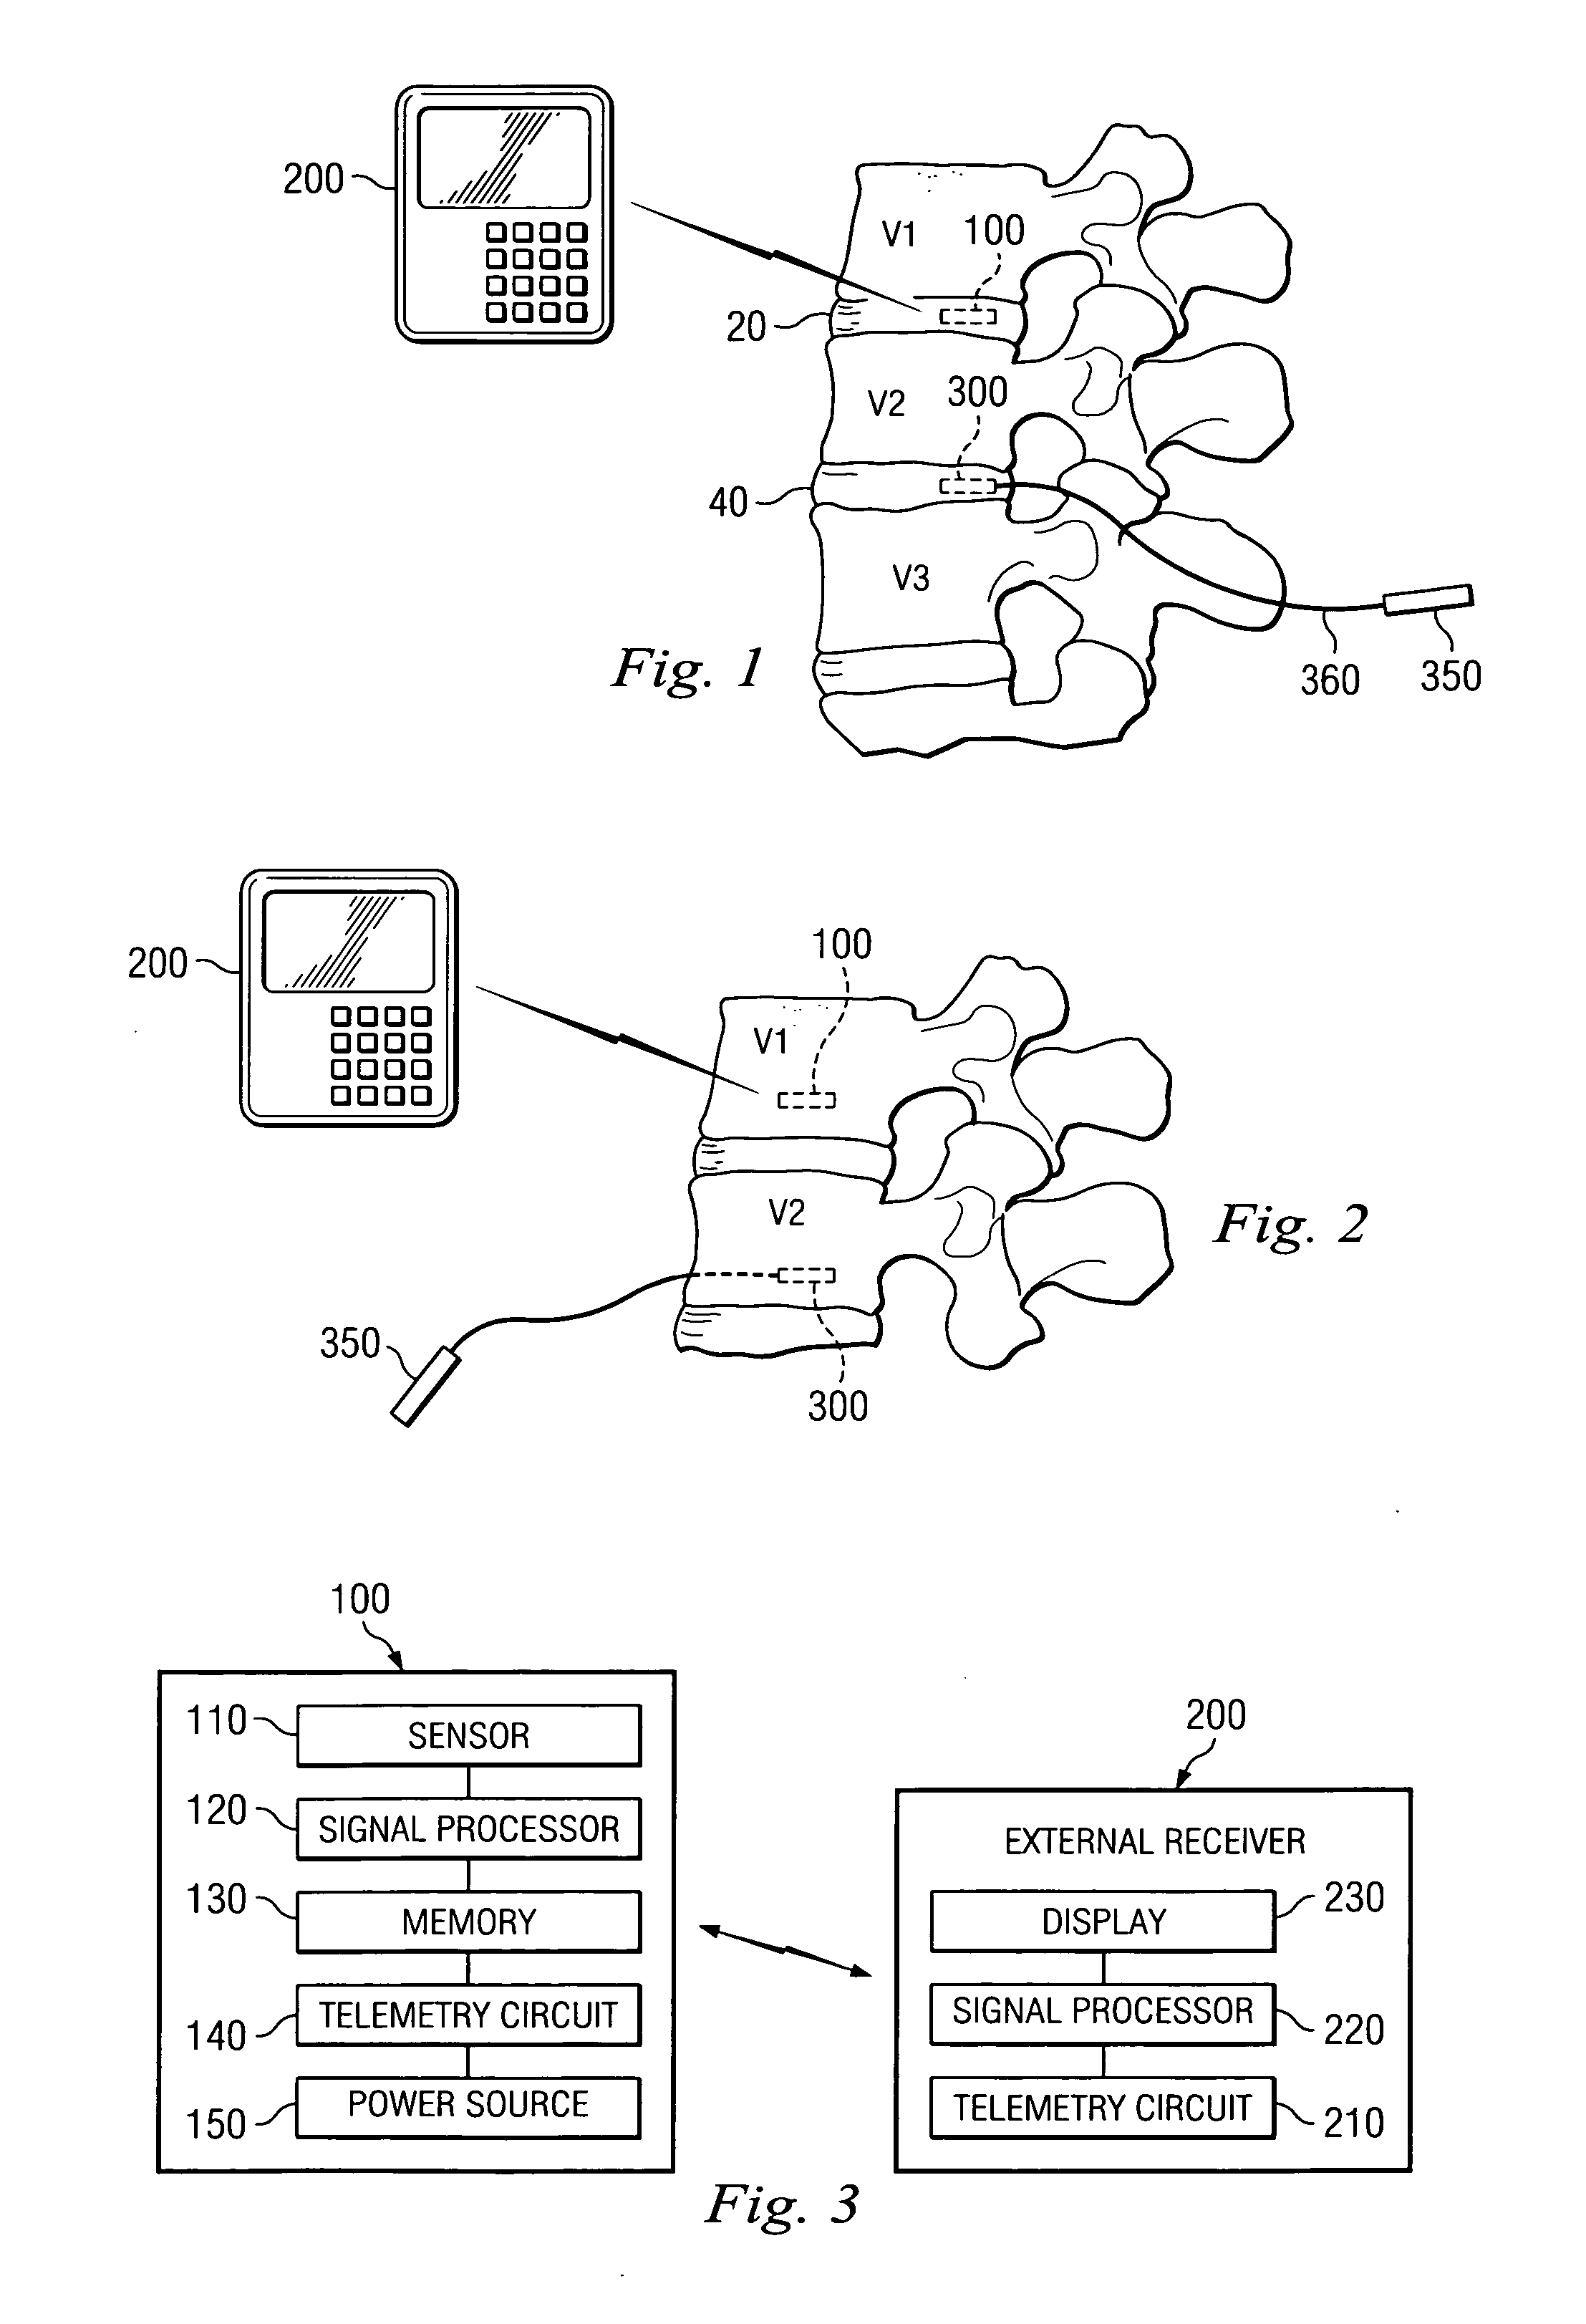 Sensor and method for spinal monitoring